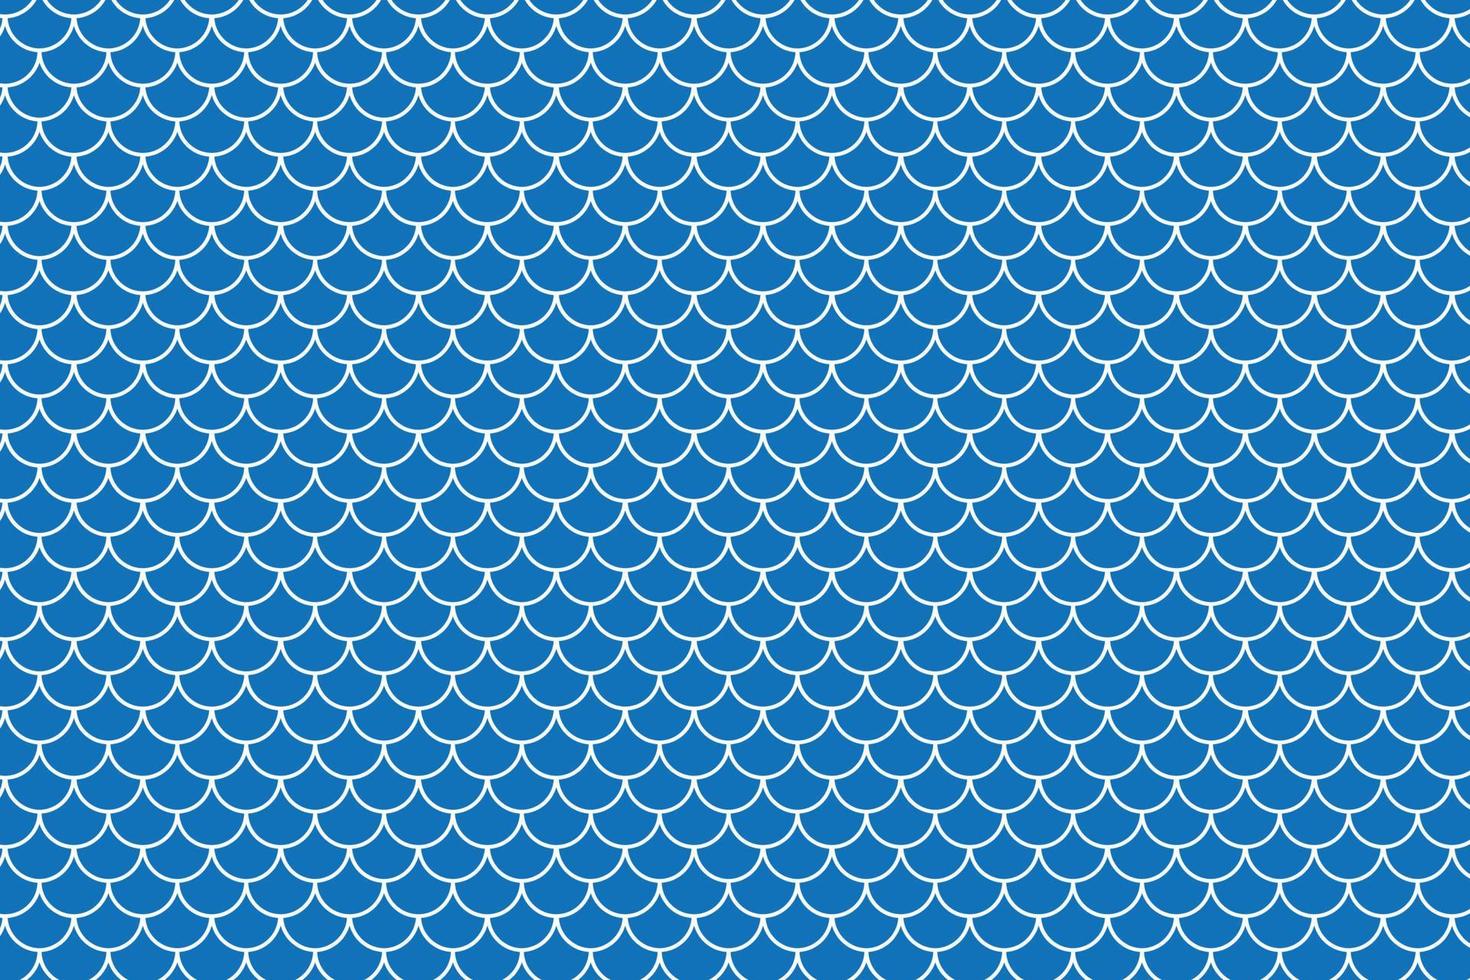 abstract white small mermaid scale on blue background pattern design. vector